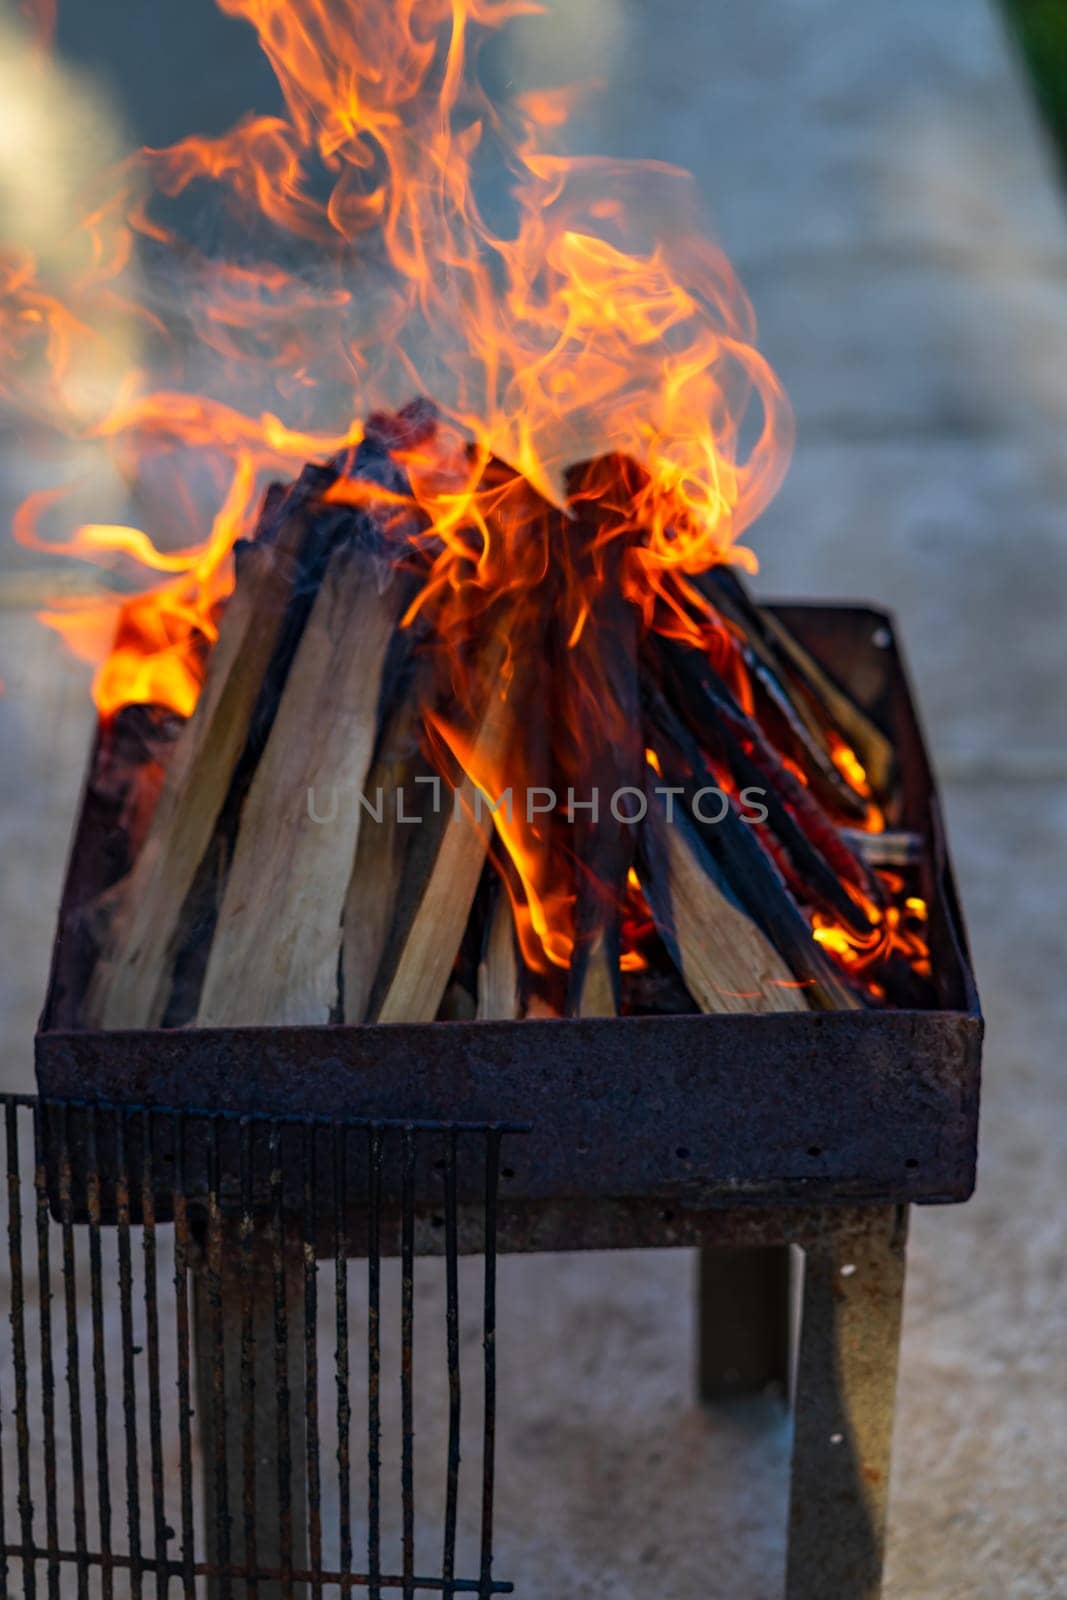 Burning wood chips to form coal. Barbecue preparation, fire before cooking. by vladispas